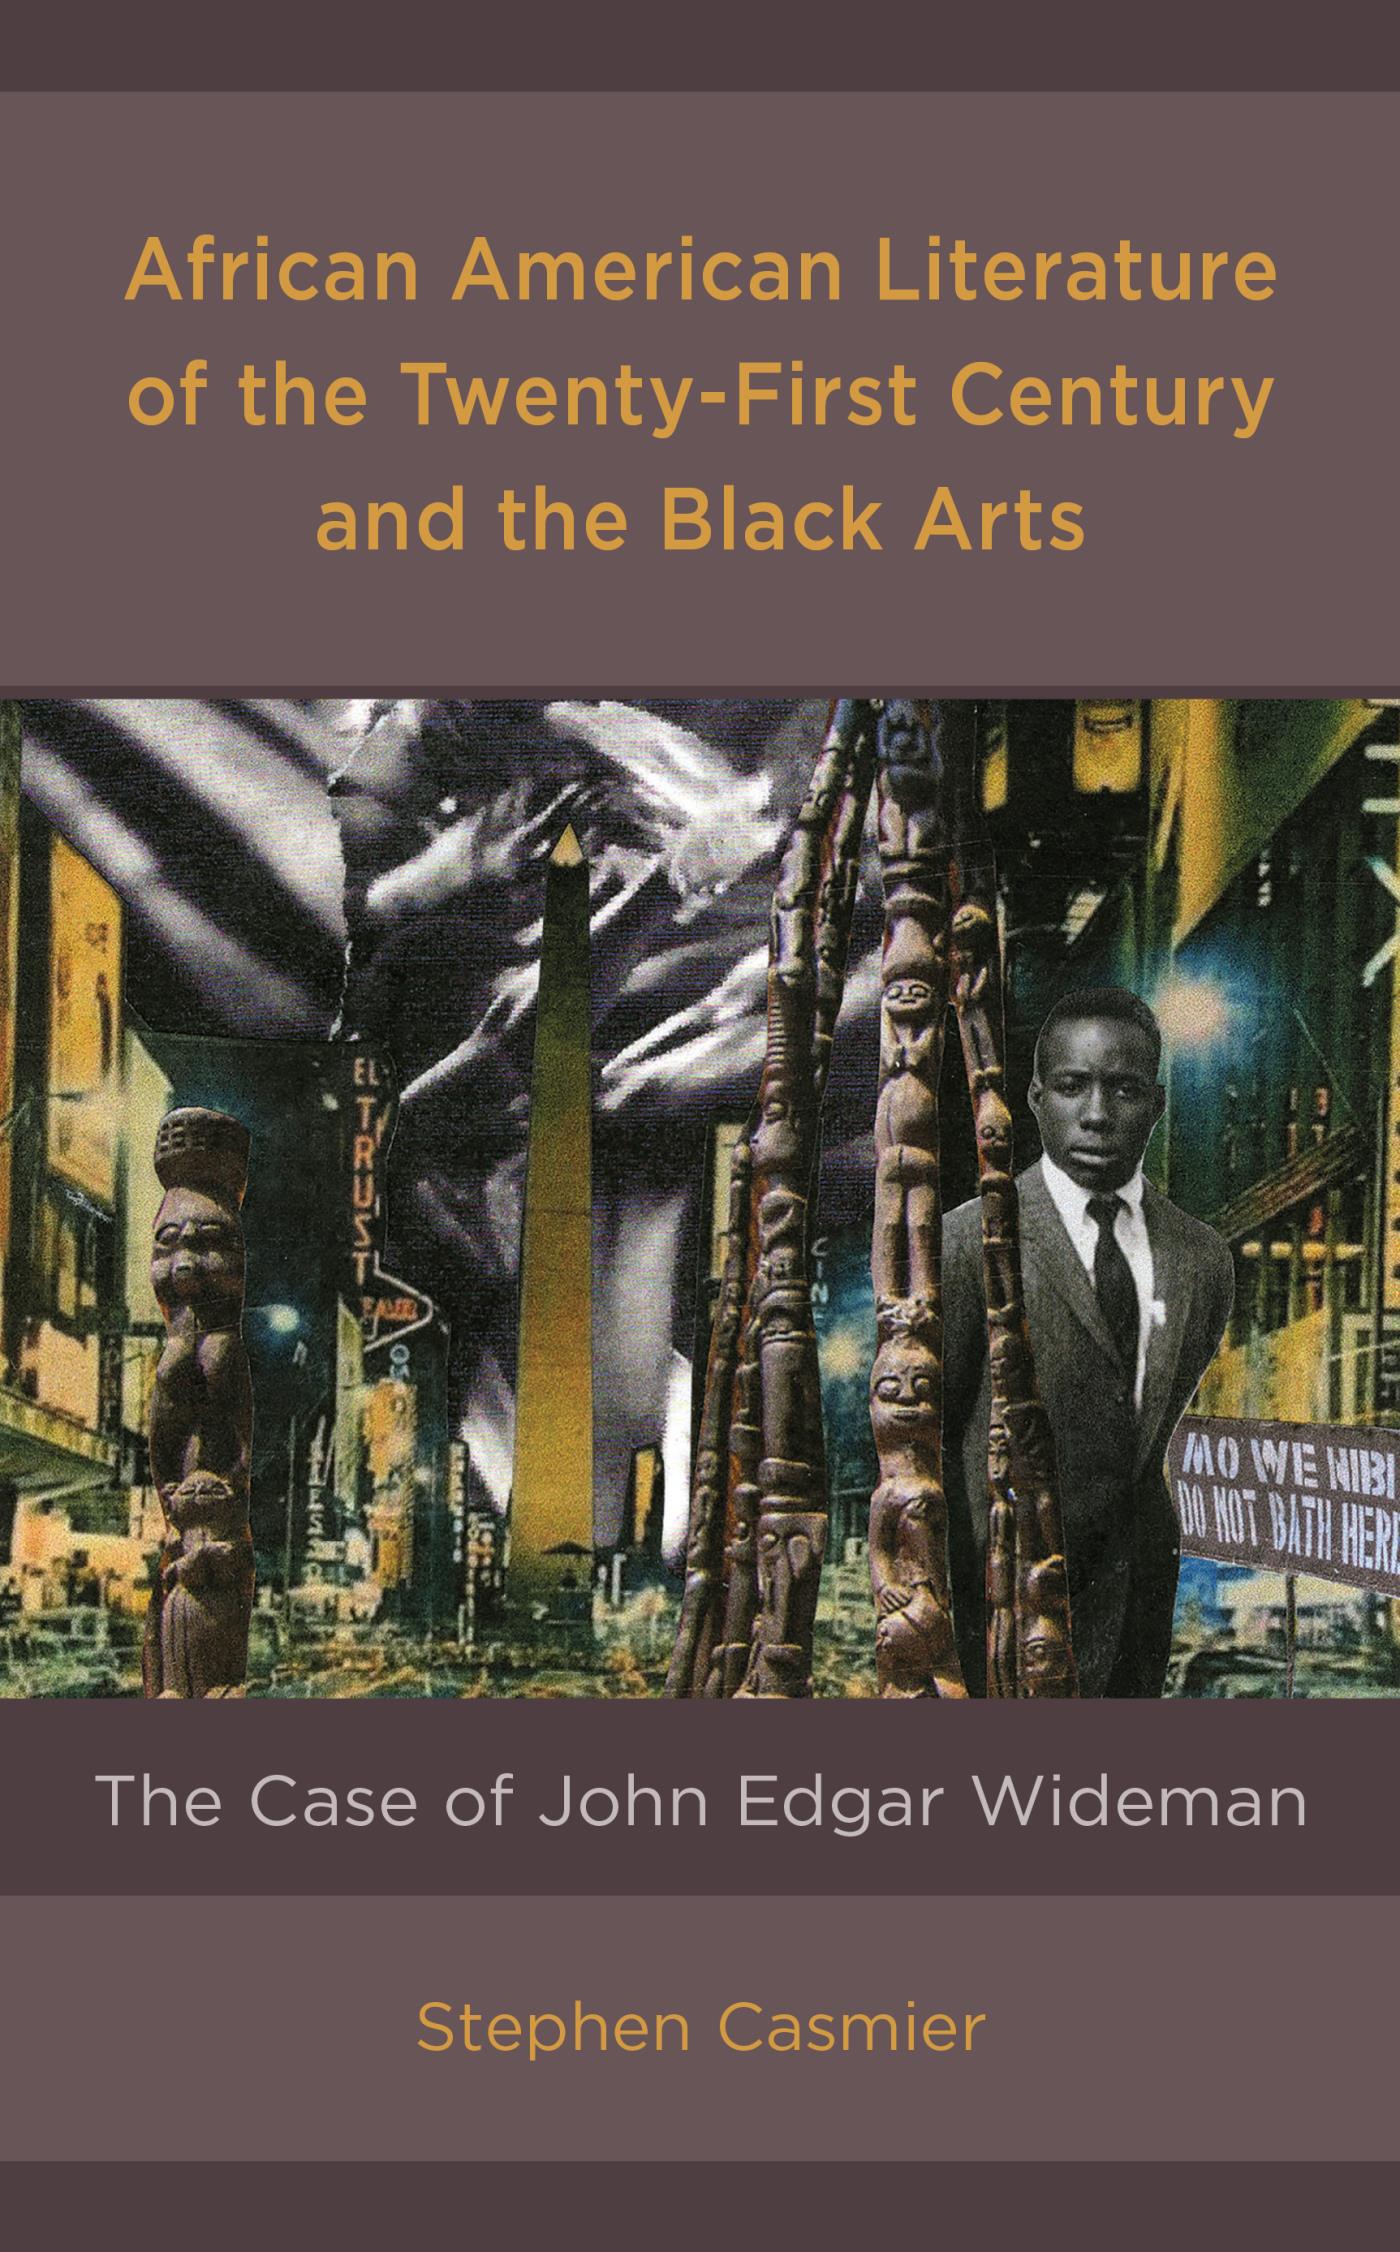 African American Literature of the Twenty-First Century and the Black Arts - 25-49.99